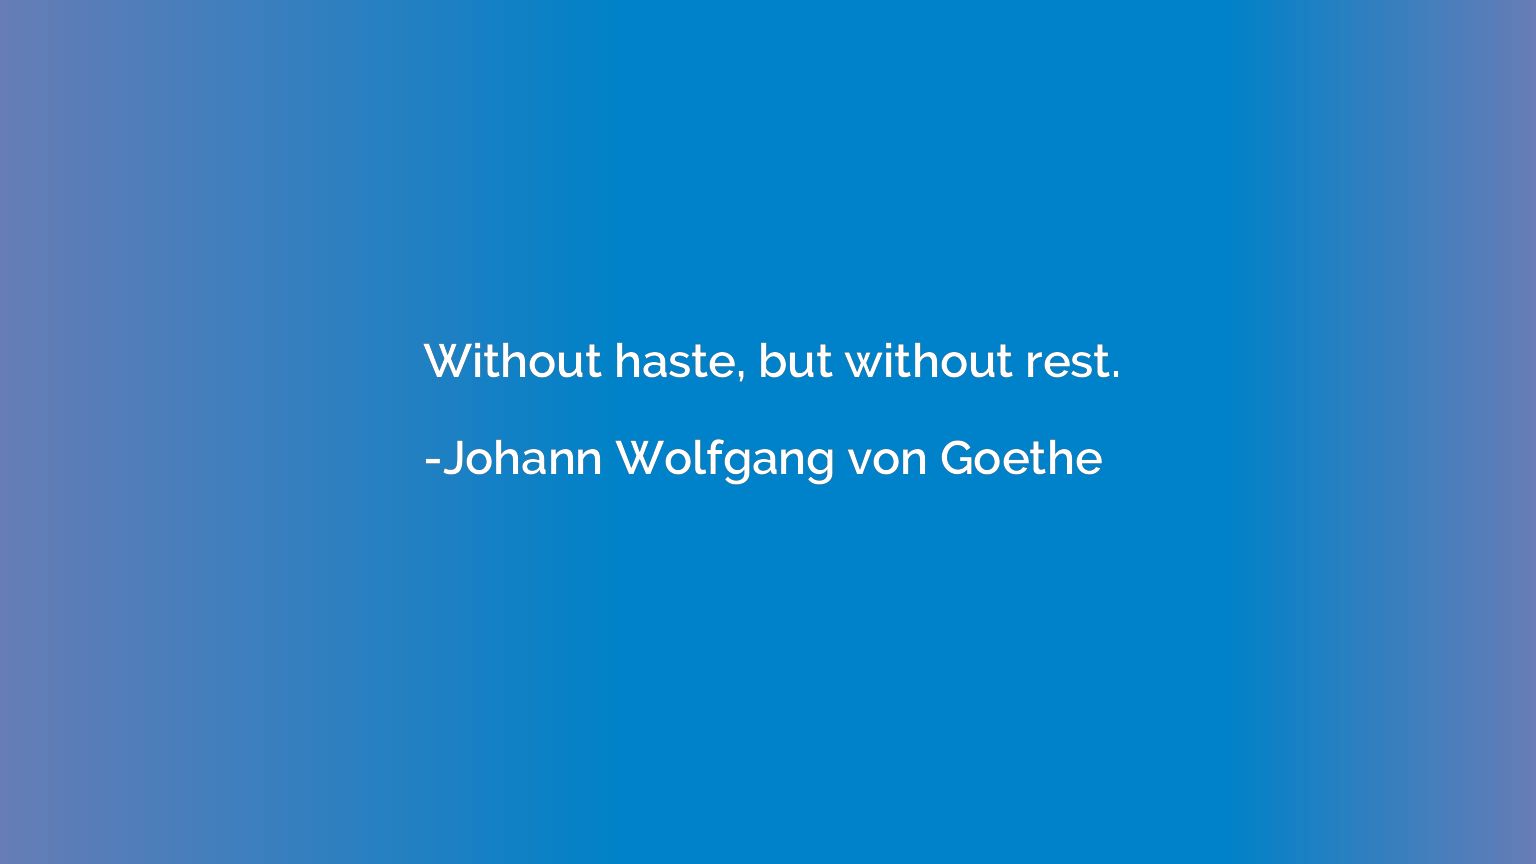 Without haste, but without rest.